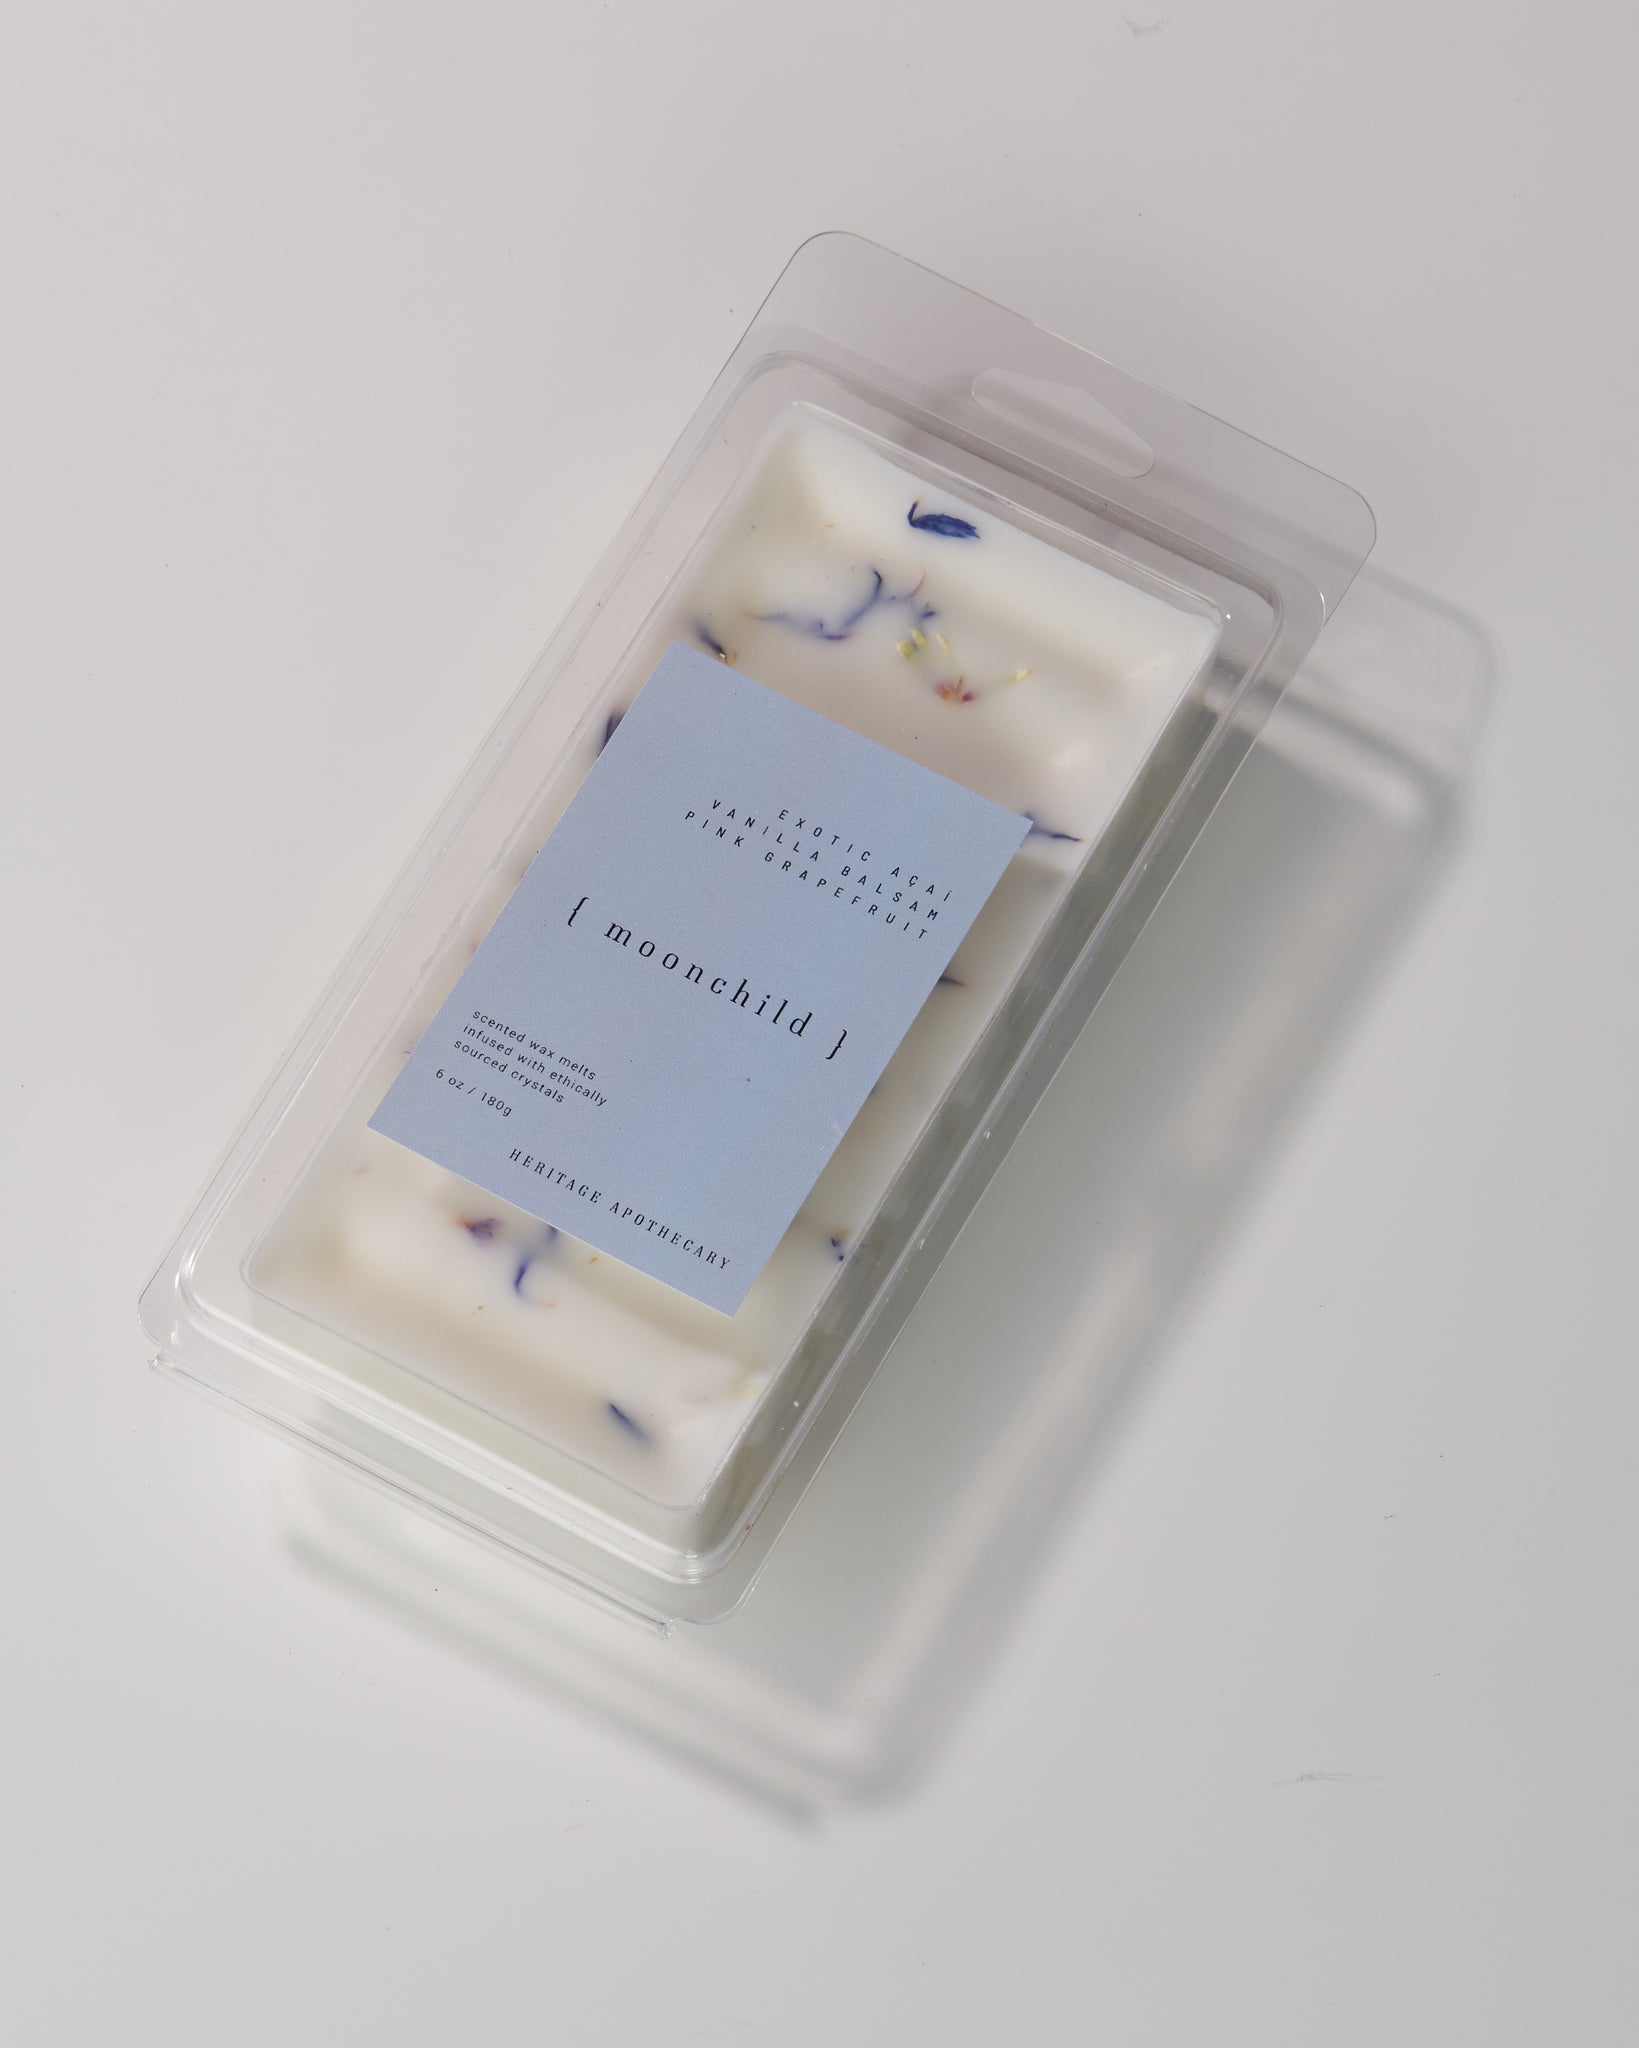 Coconut and soy wax melts with Moonchild fragrance - featuring grapefruit, acai berry, peach, jasmine, musk, and vanilla balsam notes. Enhanced with natural cornflowers for a mystical touch and third eye healing. Elevate your home's aroma.